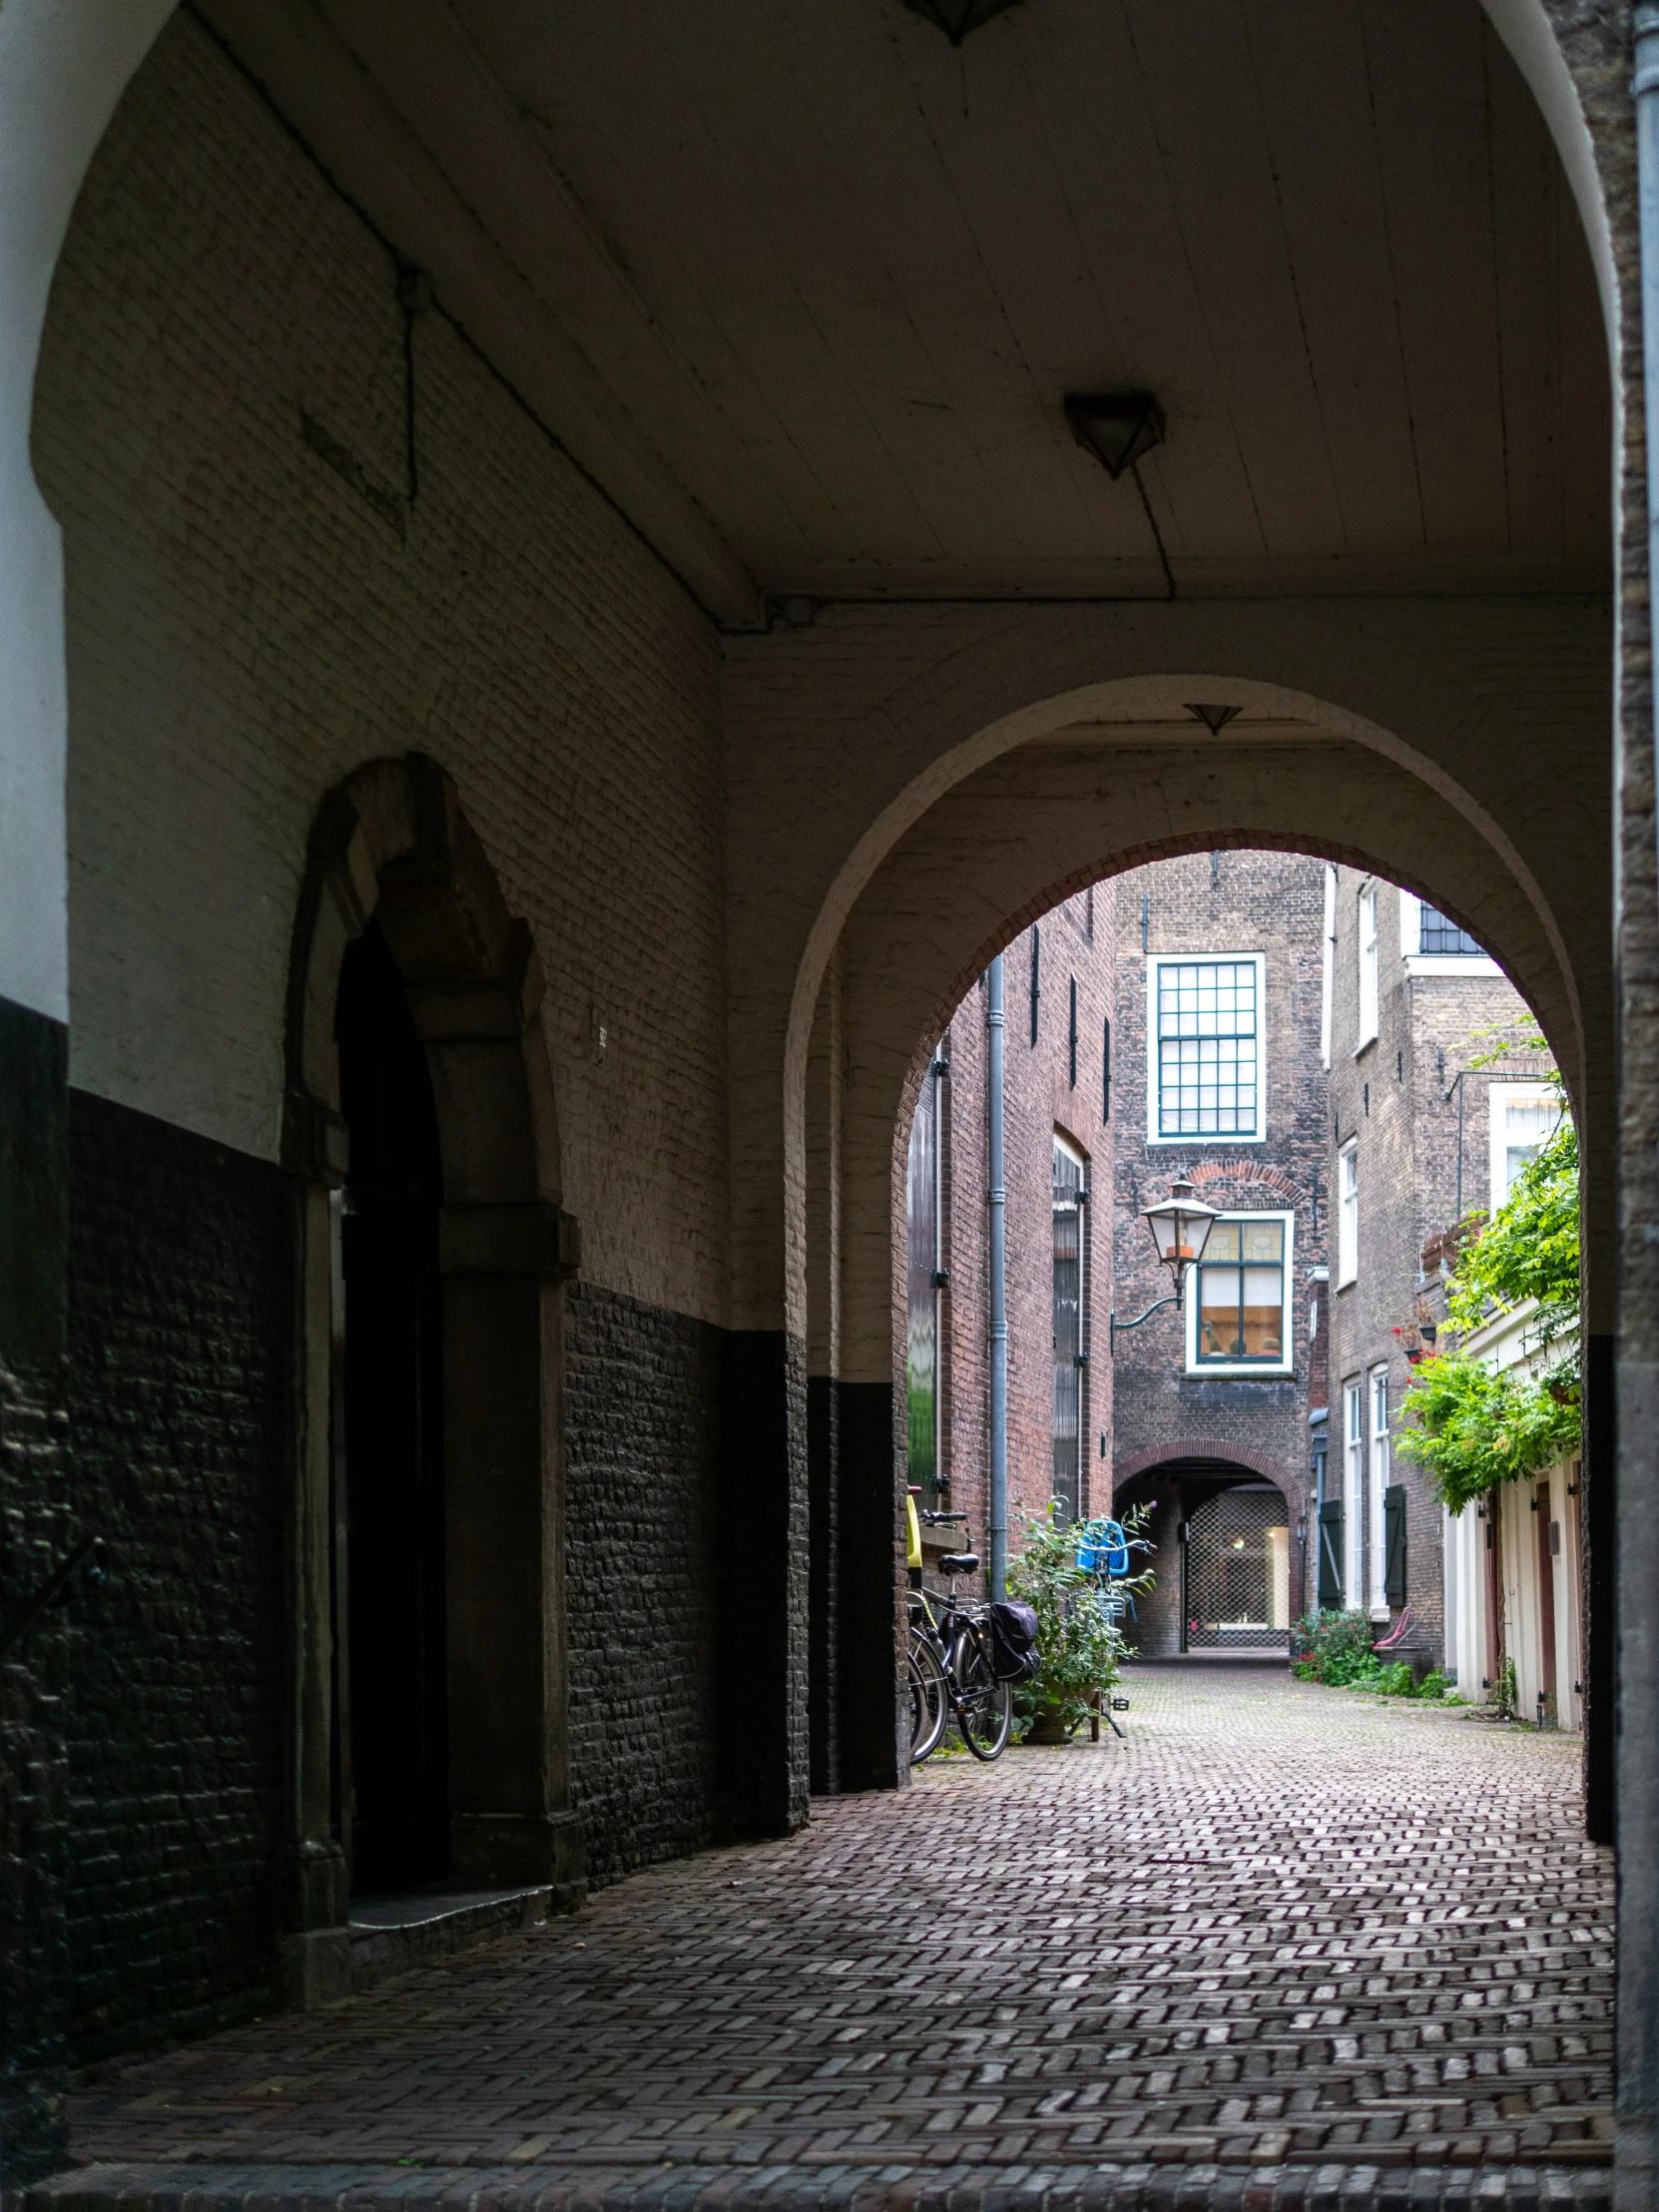 a brick walkway in an old building with a few arched doors